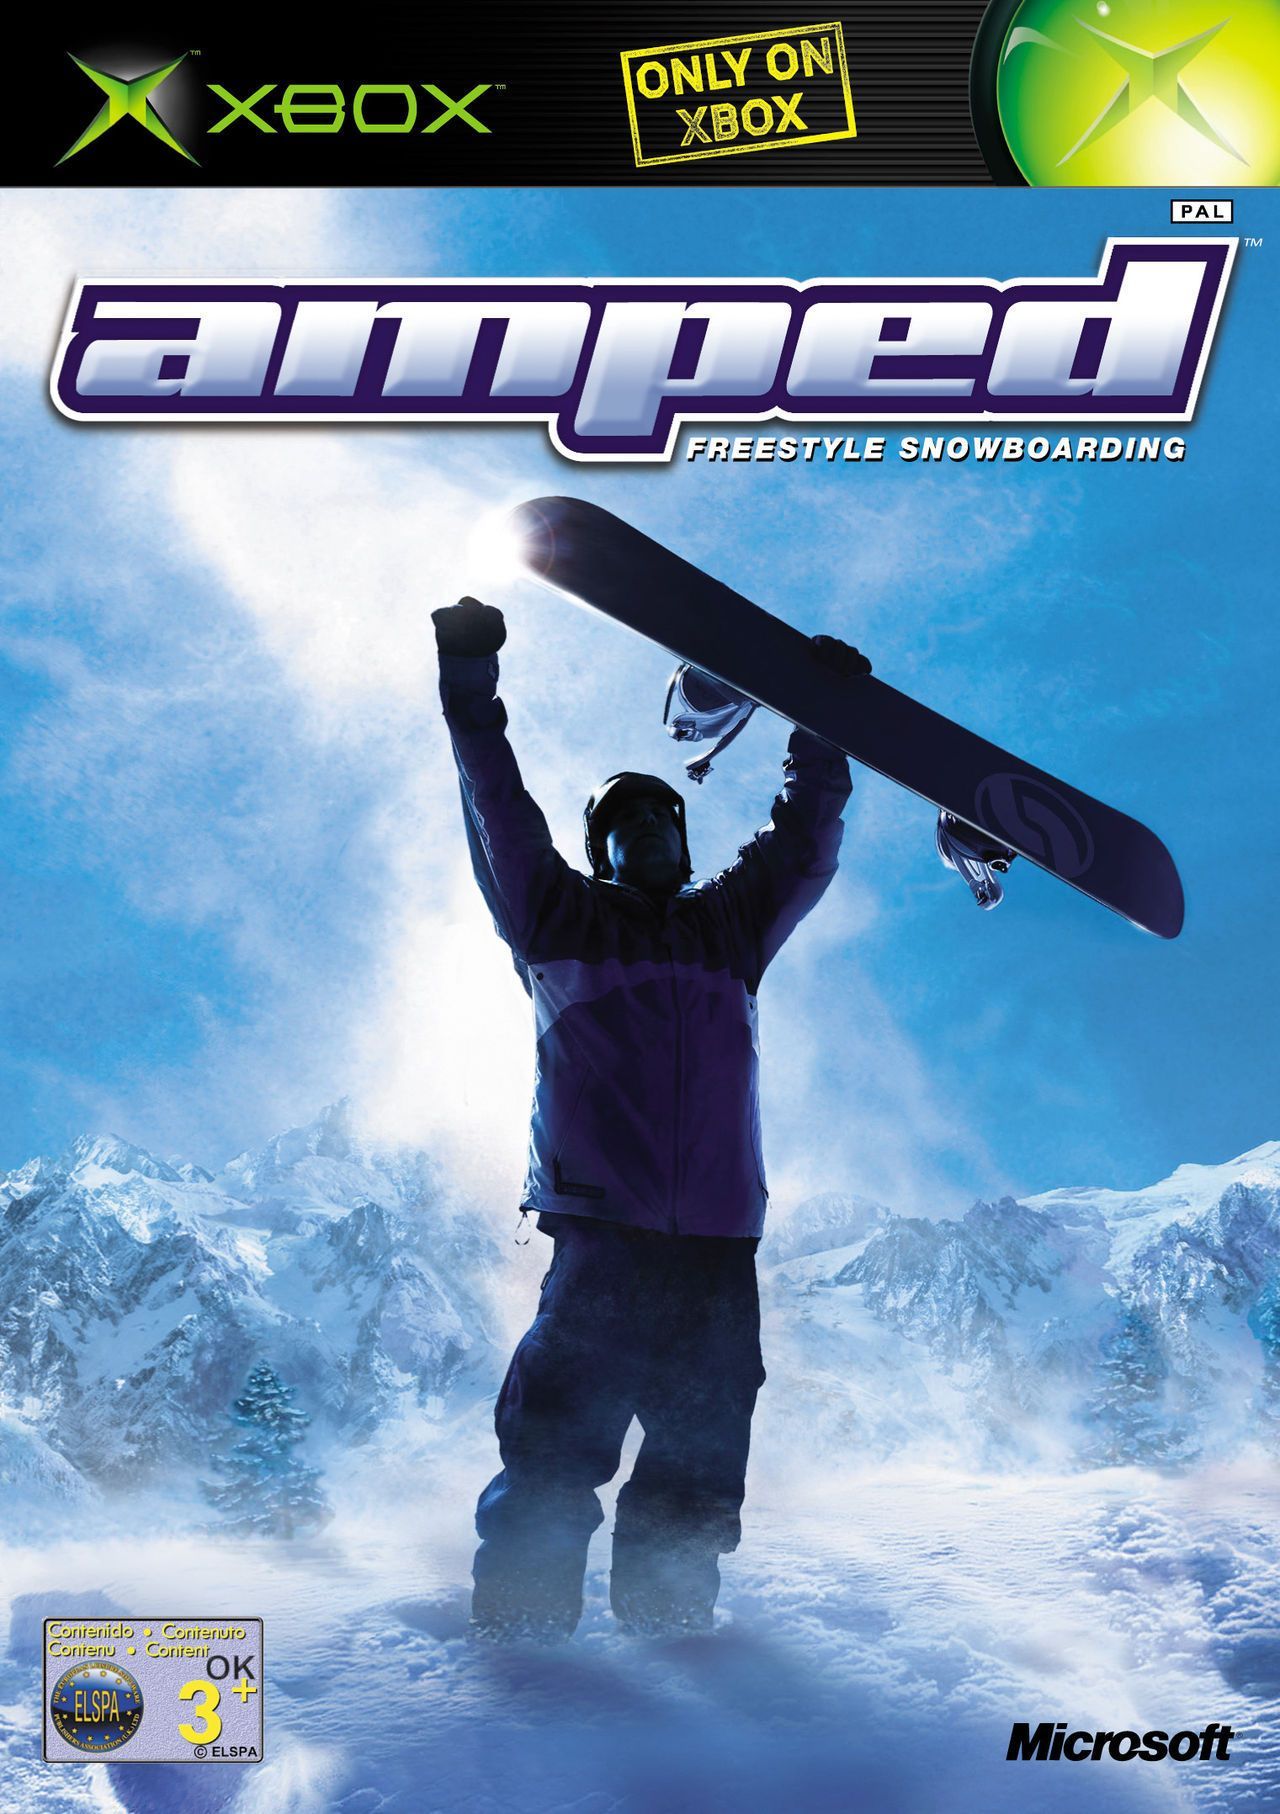 Amped Freestyle Snowboarding